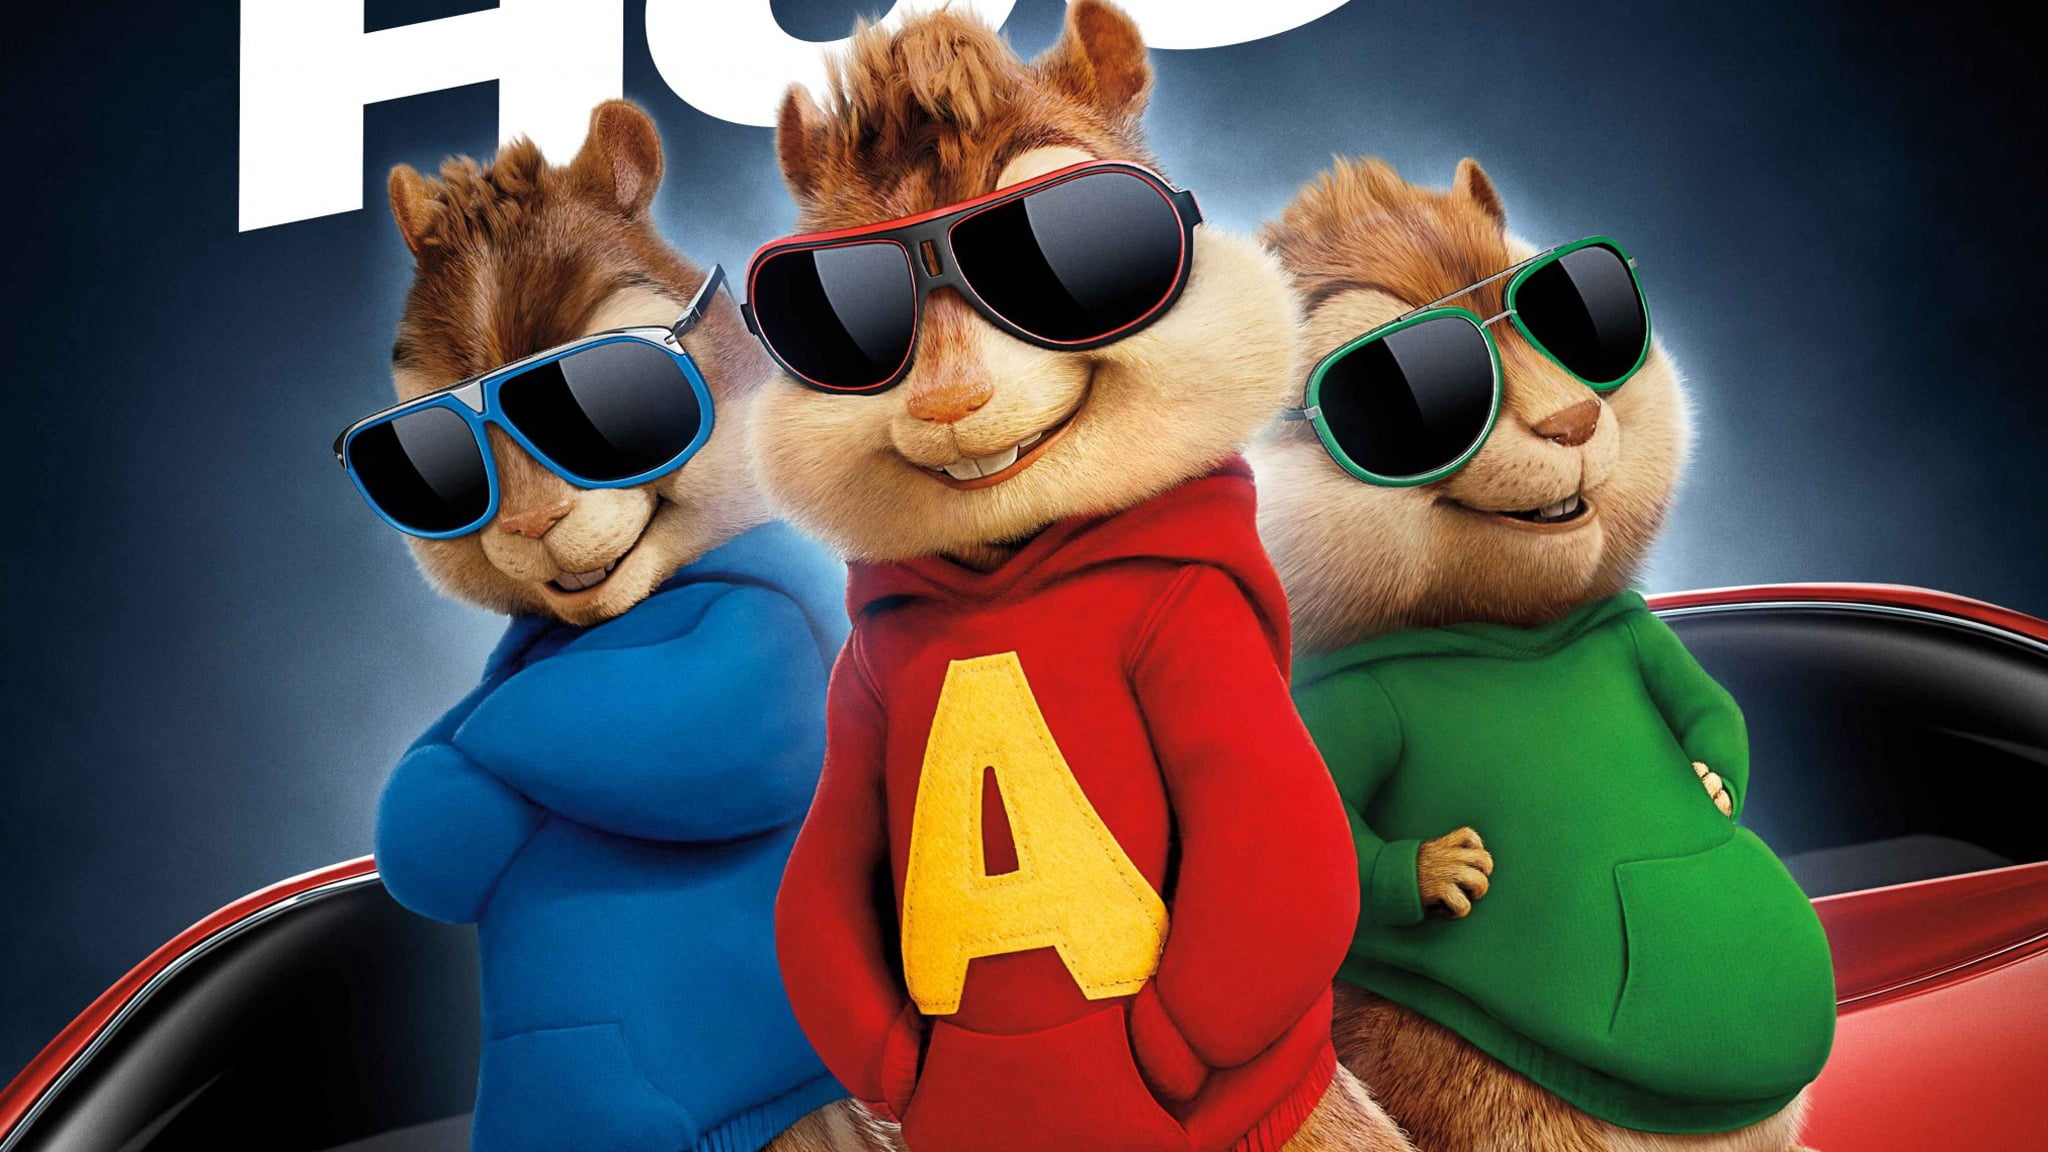 Alvin and the Chipmunks wallpaper, the road chip, simon, theodore